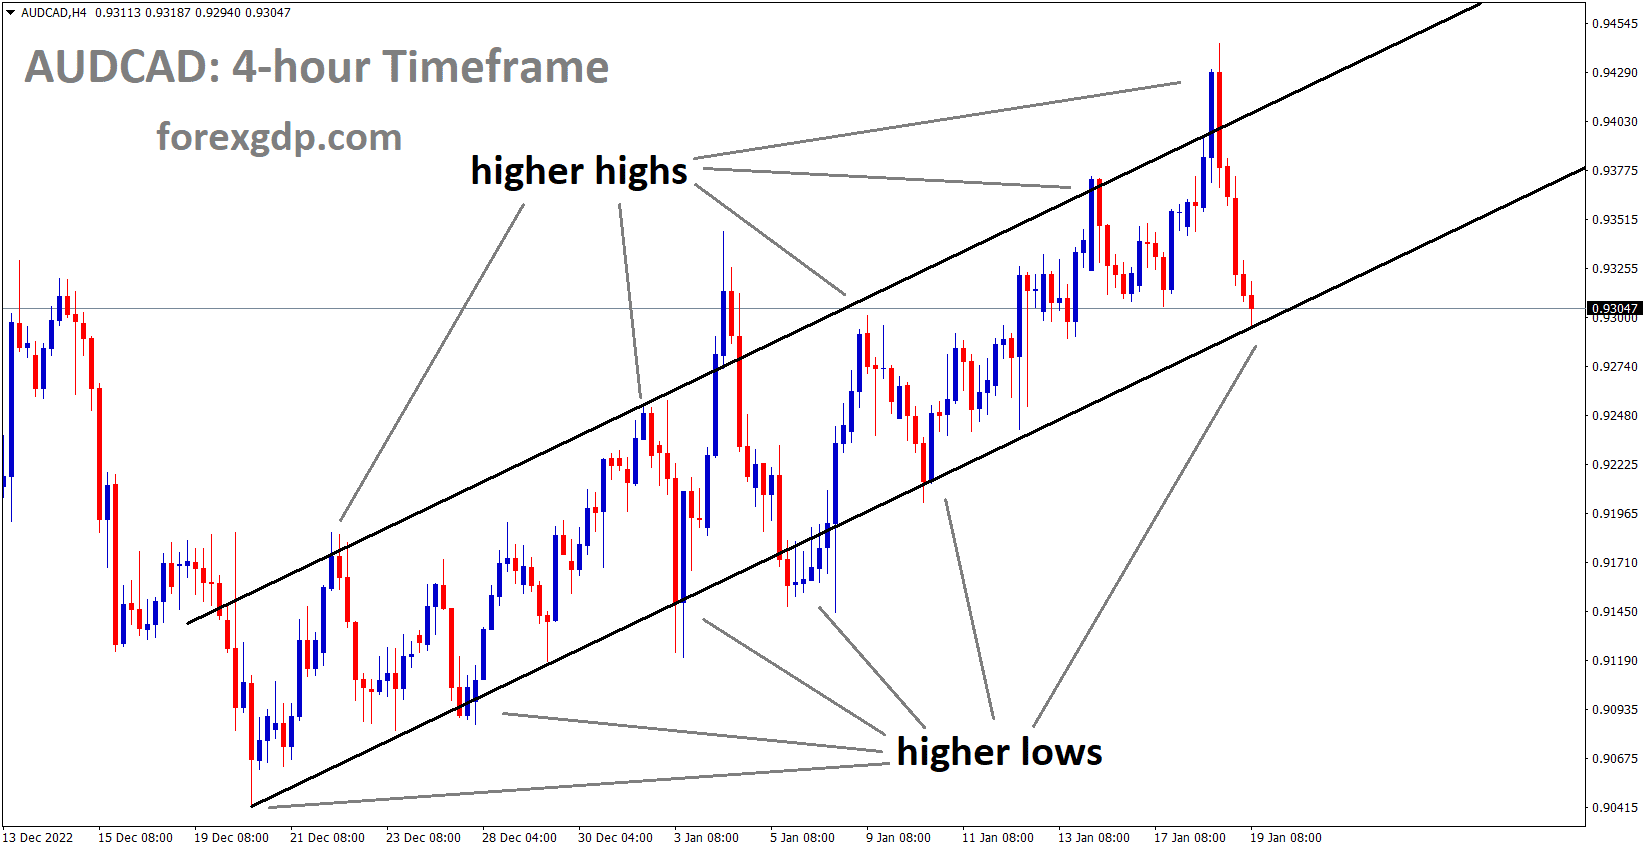 AUDCAD is moving in an ascending channel and the market has reached the higher low area of the channel